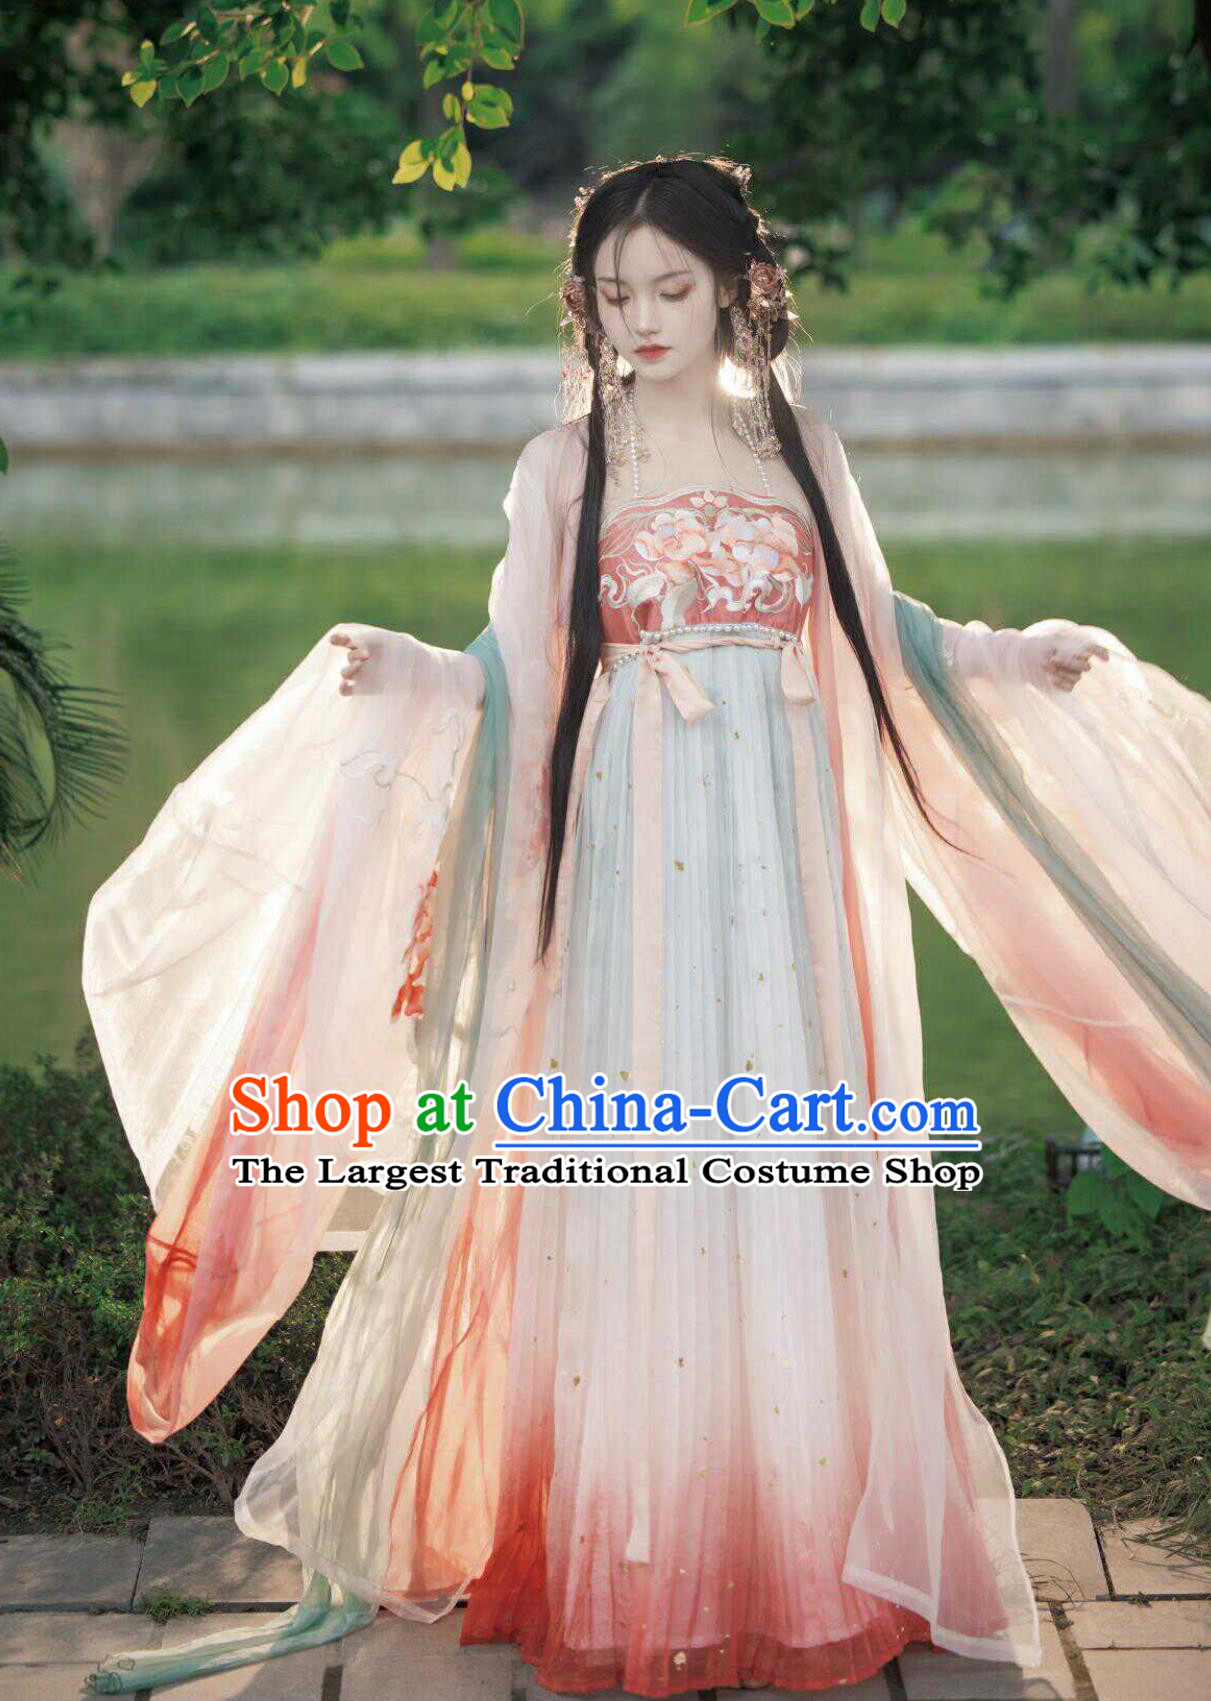 Online Buy Embroidered Hezi Qun Ancient Chinese Female Costumes China Tang Dynasty Princess Hanfu Clothing